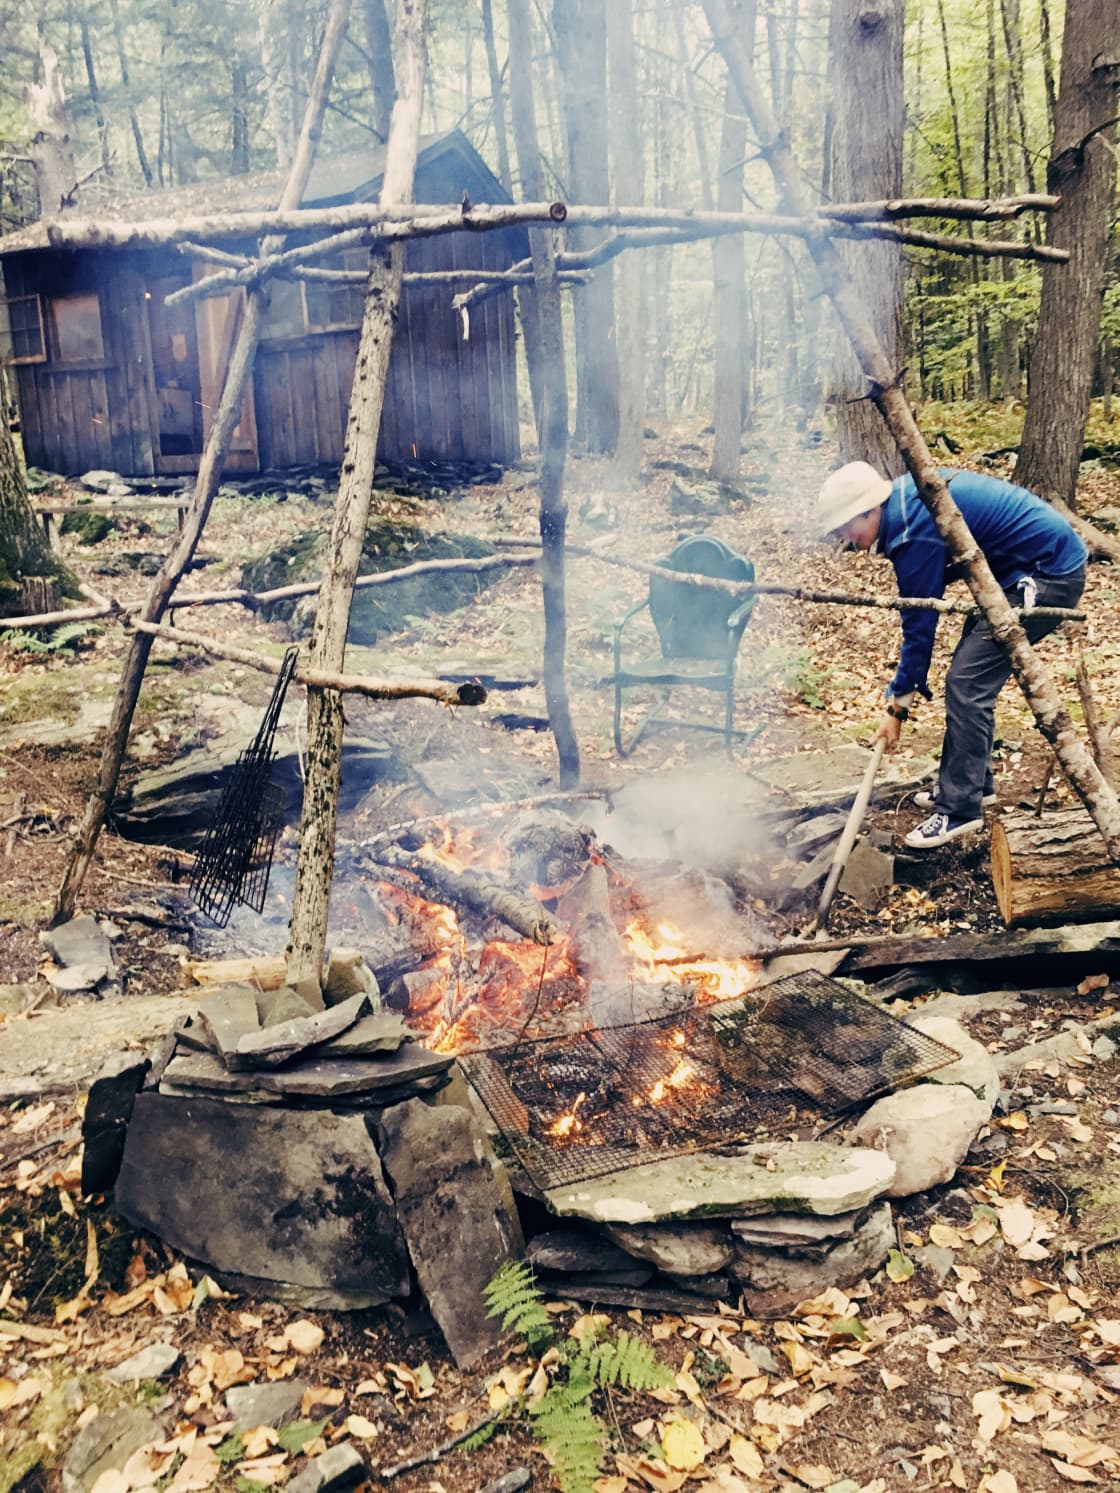 Host can stoke & build a fire for you & your guests. Other ammenities available: grocerie shopping, hikes, local antiques tours, fishing trips, & guided foriaging trips with catered meals often cooked over open fire. Additonal costs apply. Inquire with rental.